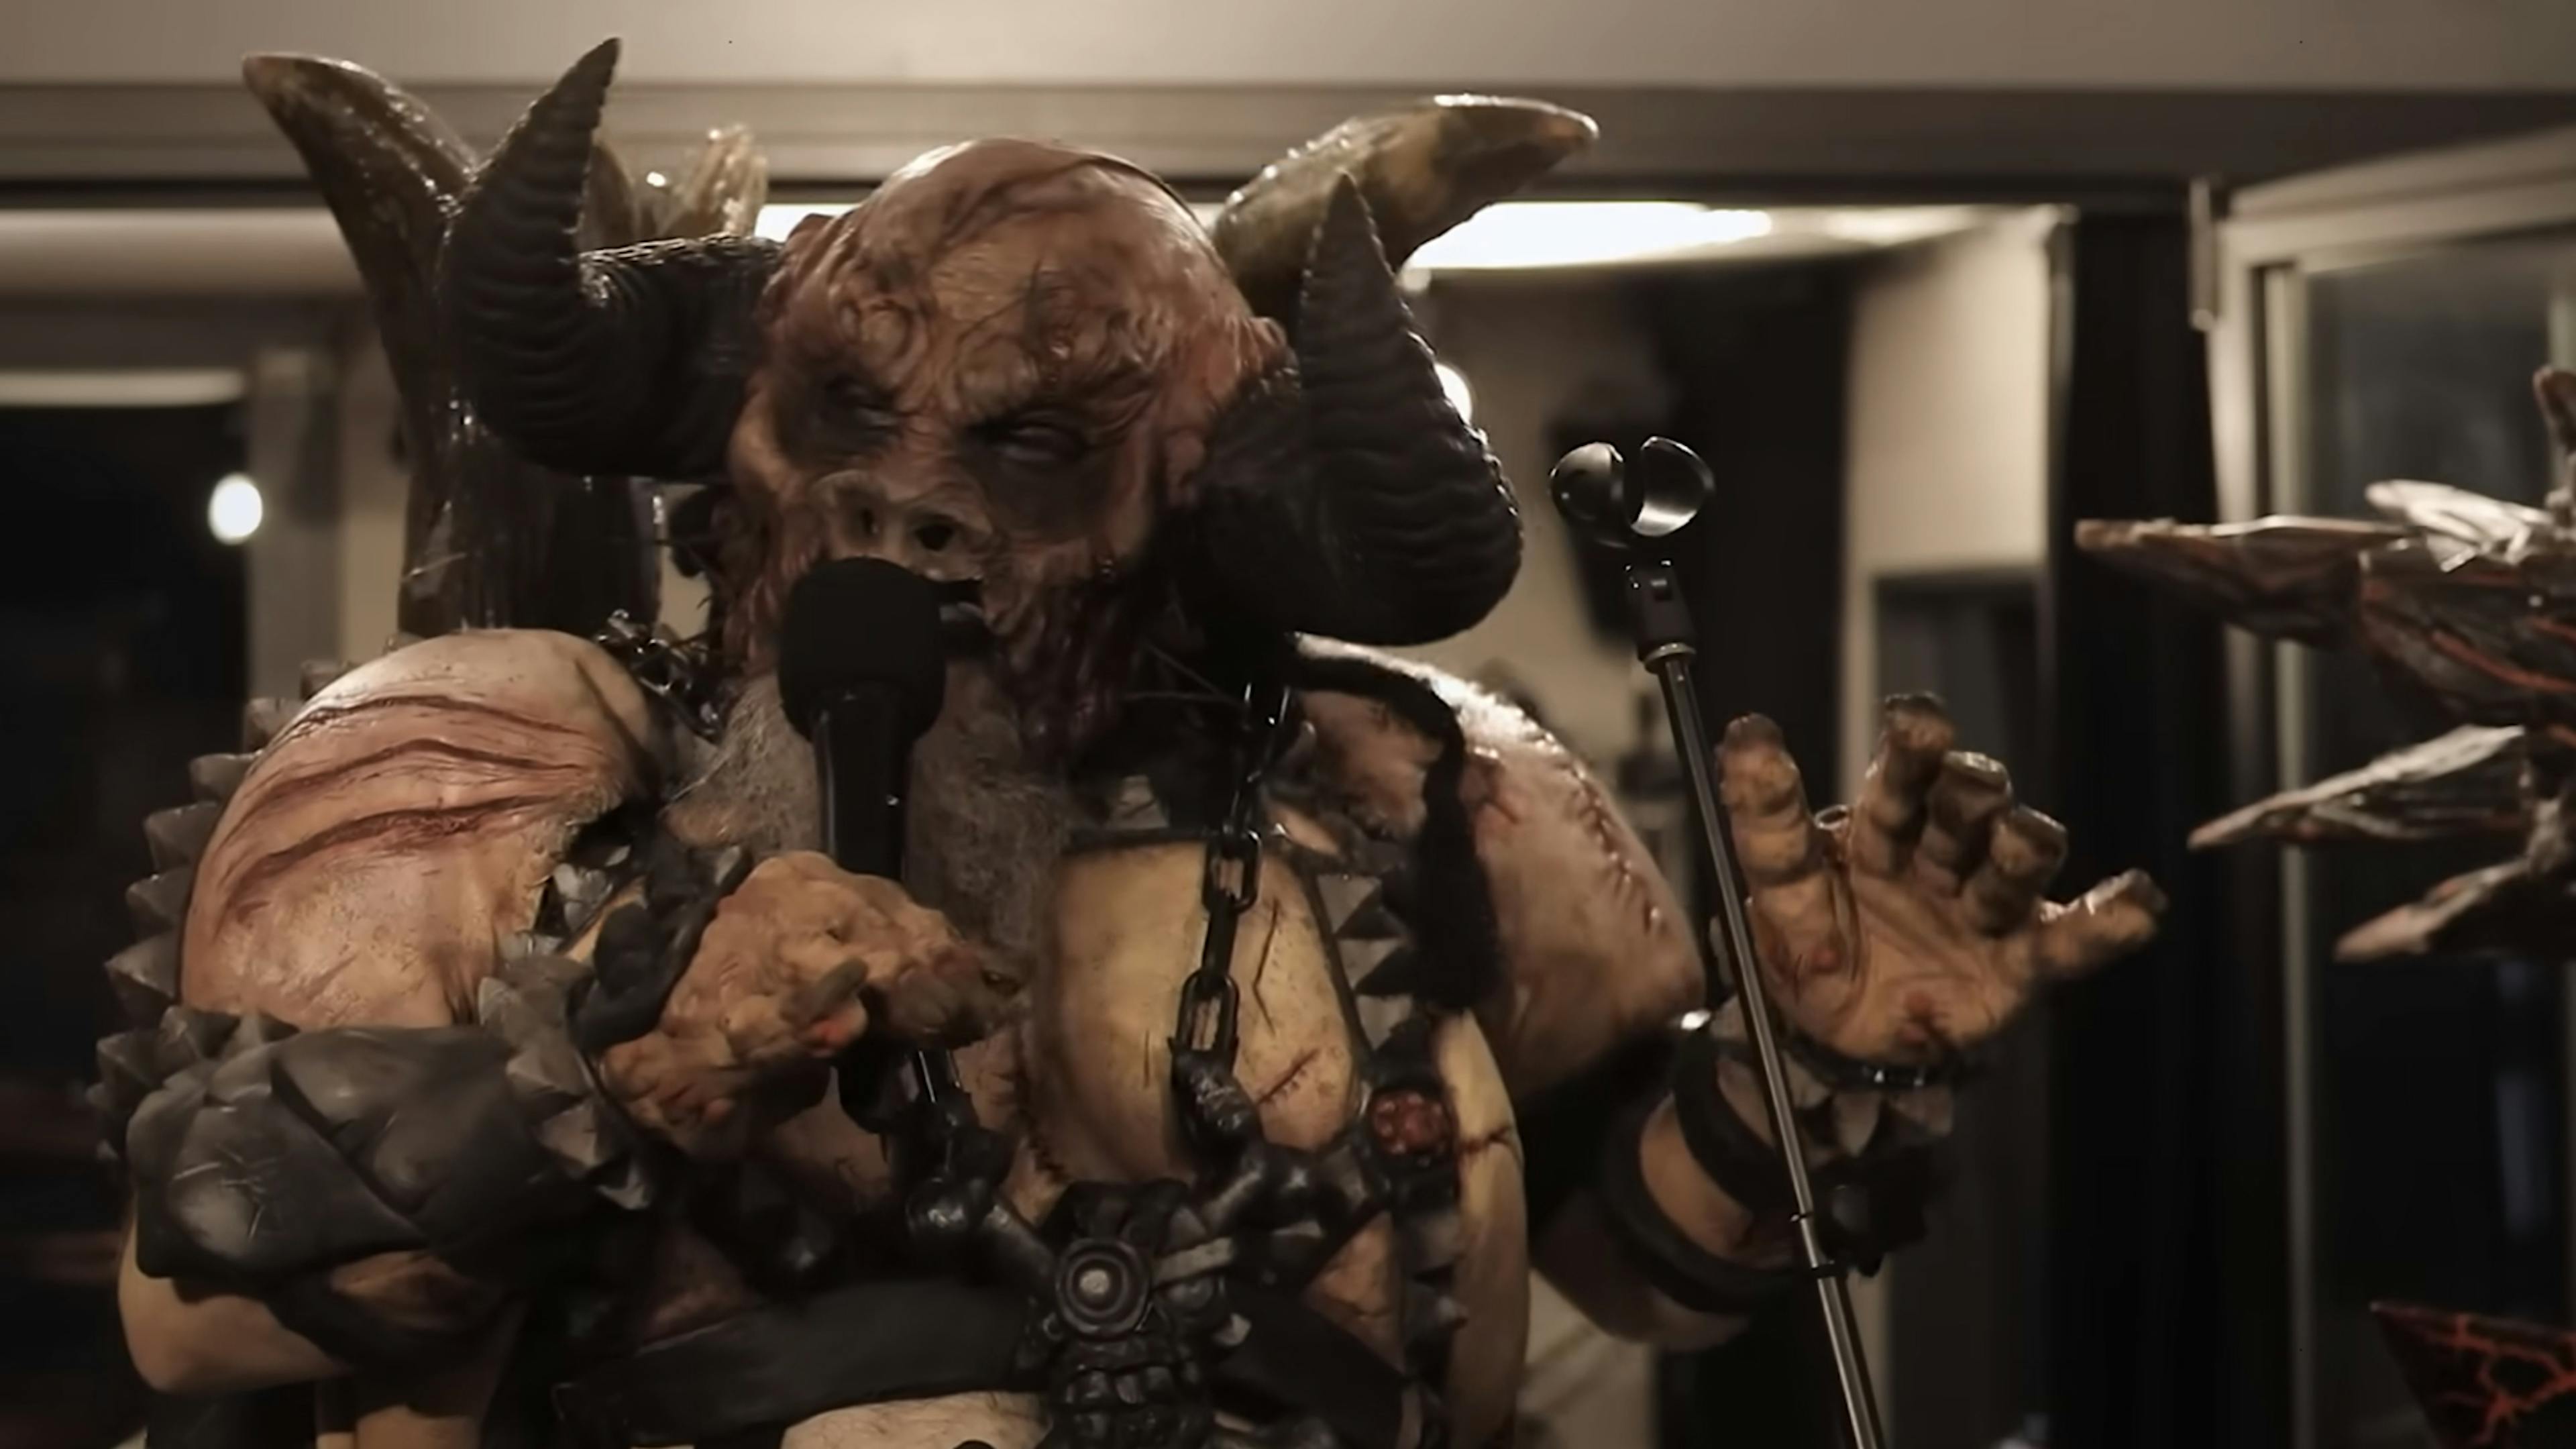 Watch GWAR profess their love for Ryan Gosling by covering I’m Just Ken